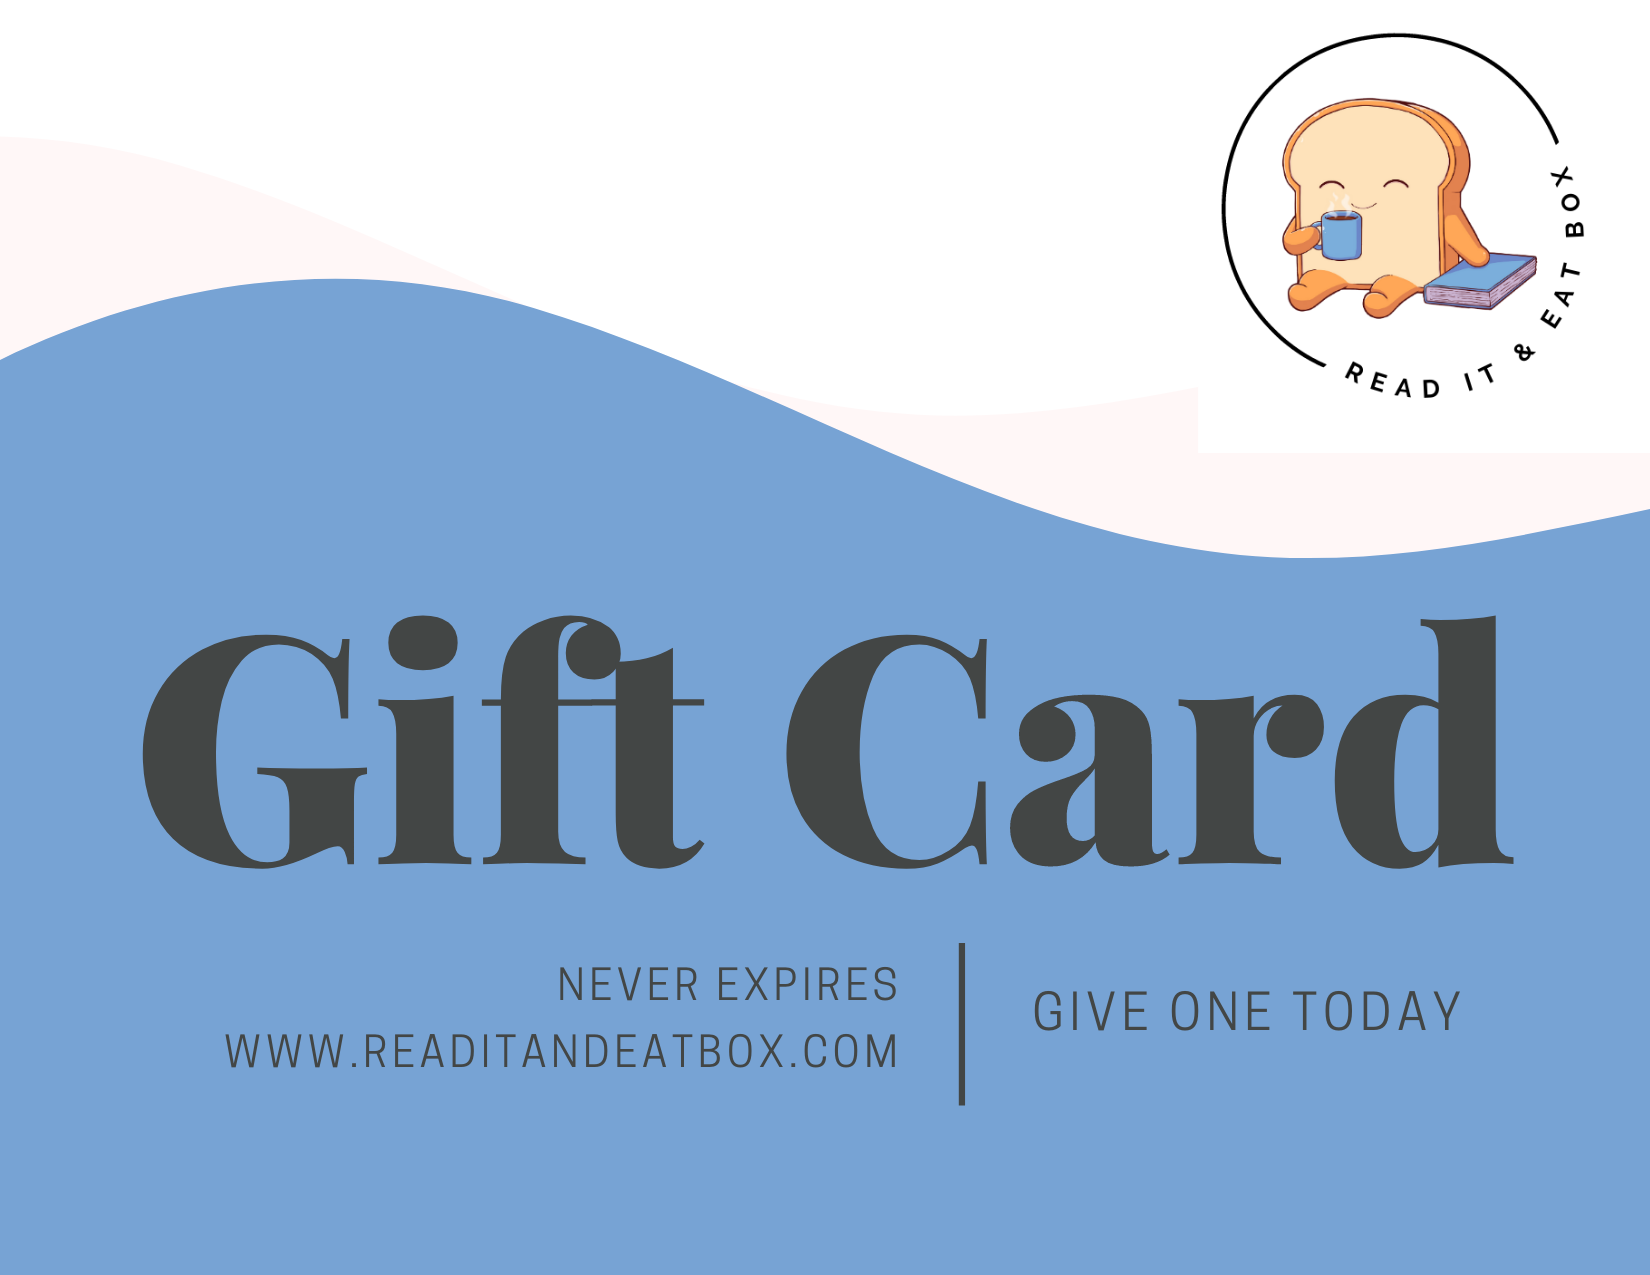 361-read-it-eat-gift-card-1-16892779812109.png